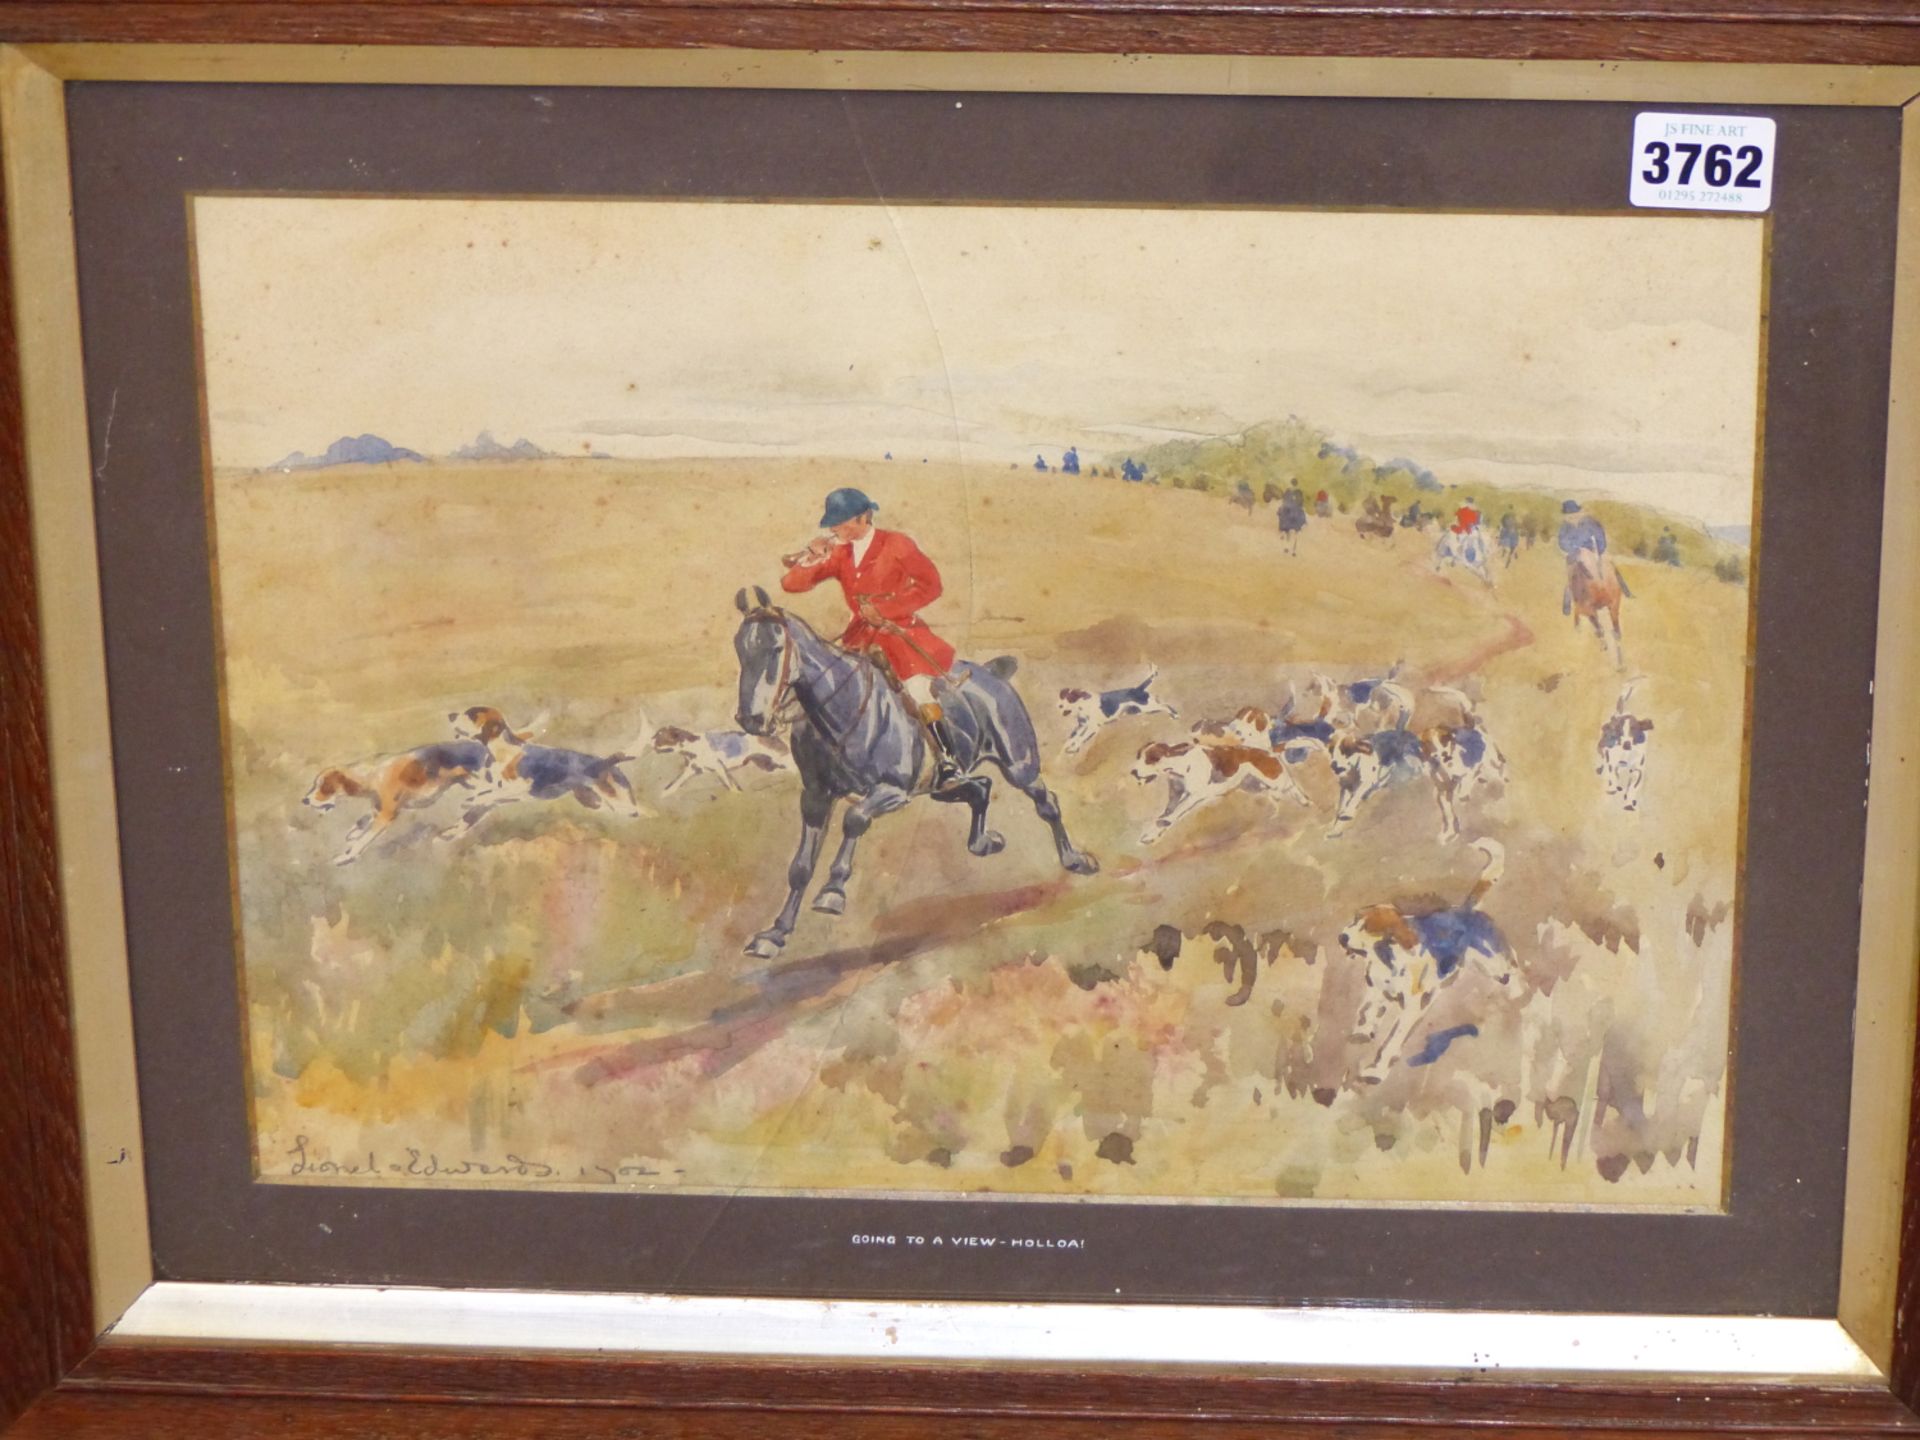 LIONEL EDWARDS (1878-1966) ARR. GOING TO A VIEW -HOLLOA!. WATERCOLOUR, SIGNED AND DATED 1902 LOWER - Image 3 of 7